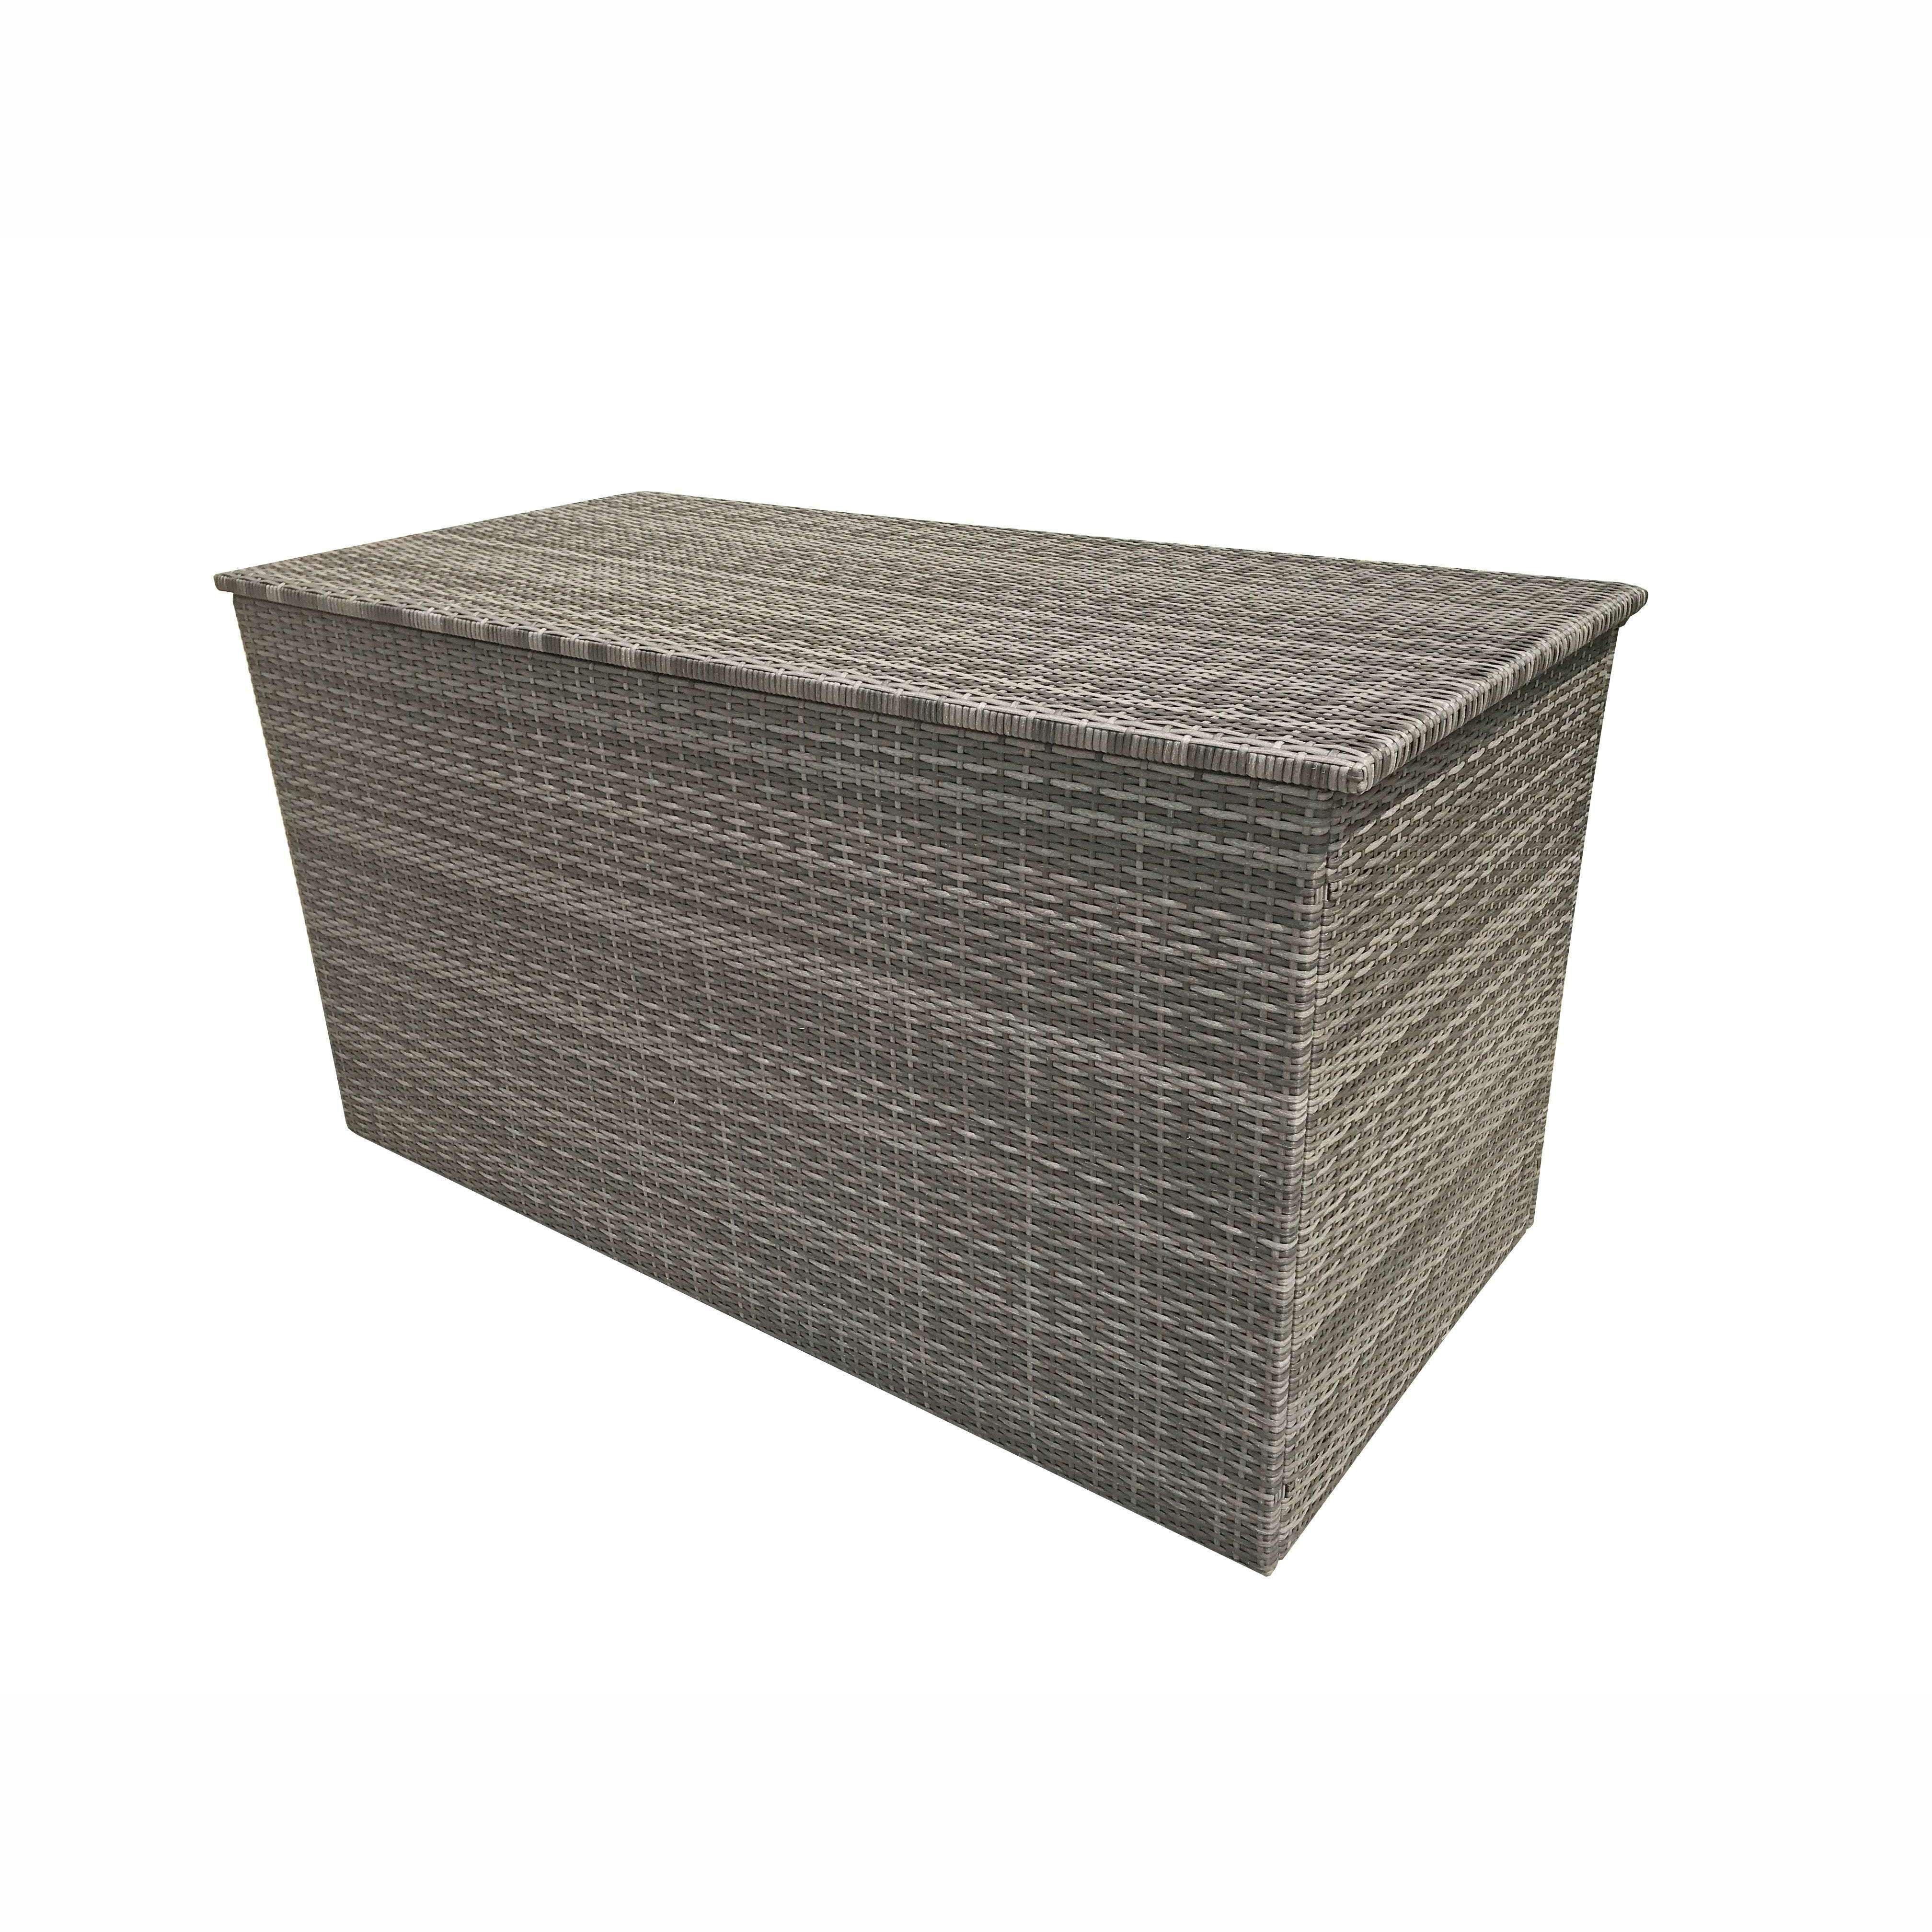 Exceptional Garden:Signature Weave Cushion Box - Large Flat Grey Weave